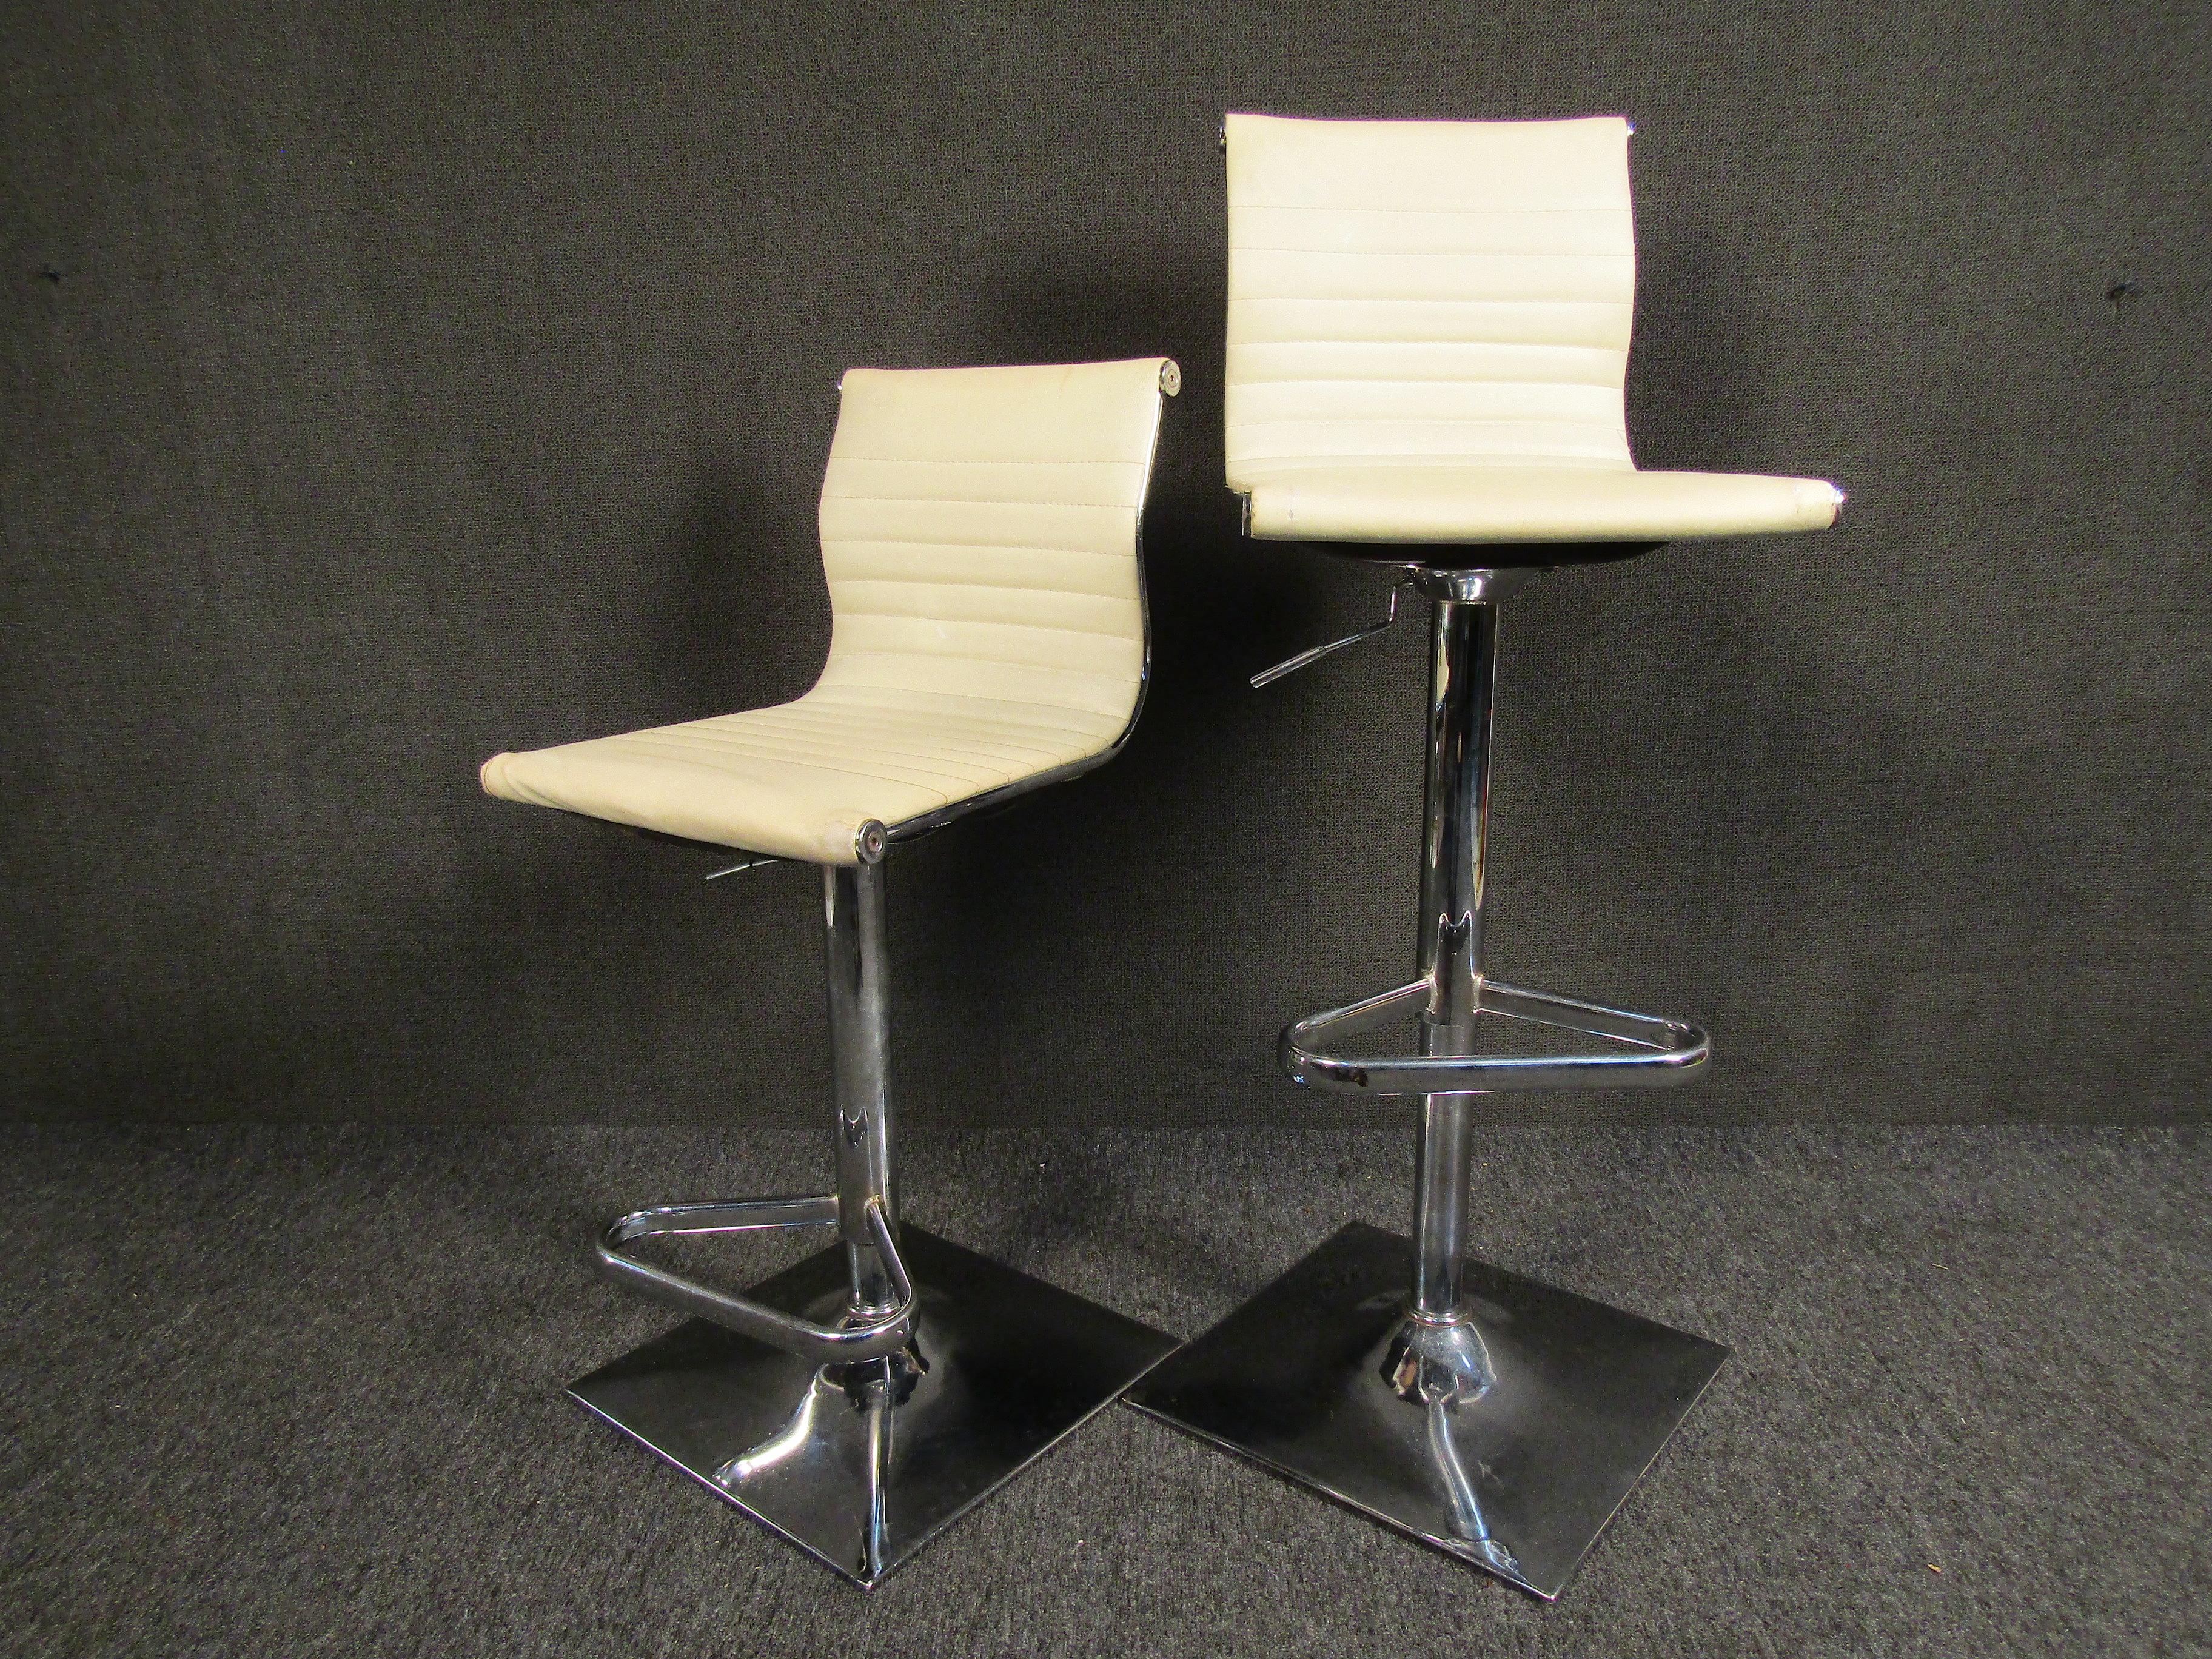 Sleek pair of vintage modern bar stools with adjustable seats. Finished in a white automotive-style vinyl upholstery with chrome footrests and base. These would be a great addition to any bar or elevated countertop.

Please confirm item location